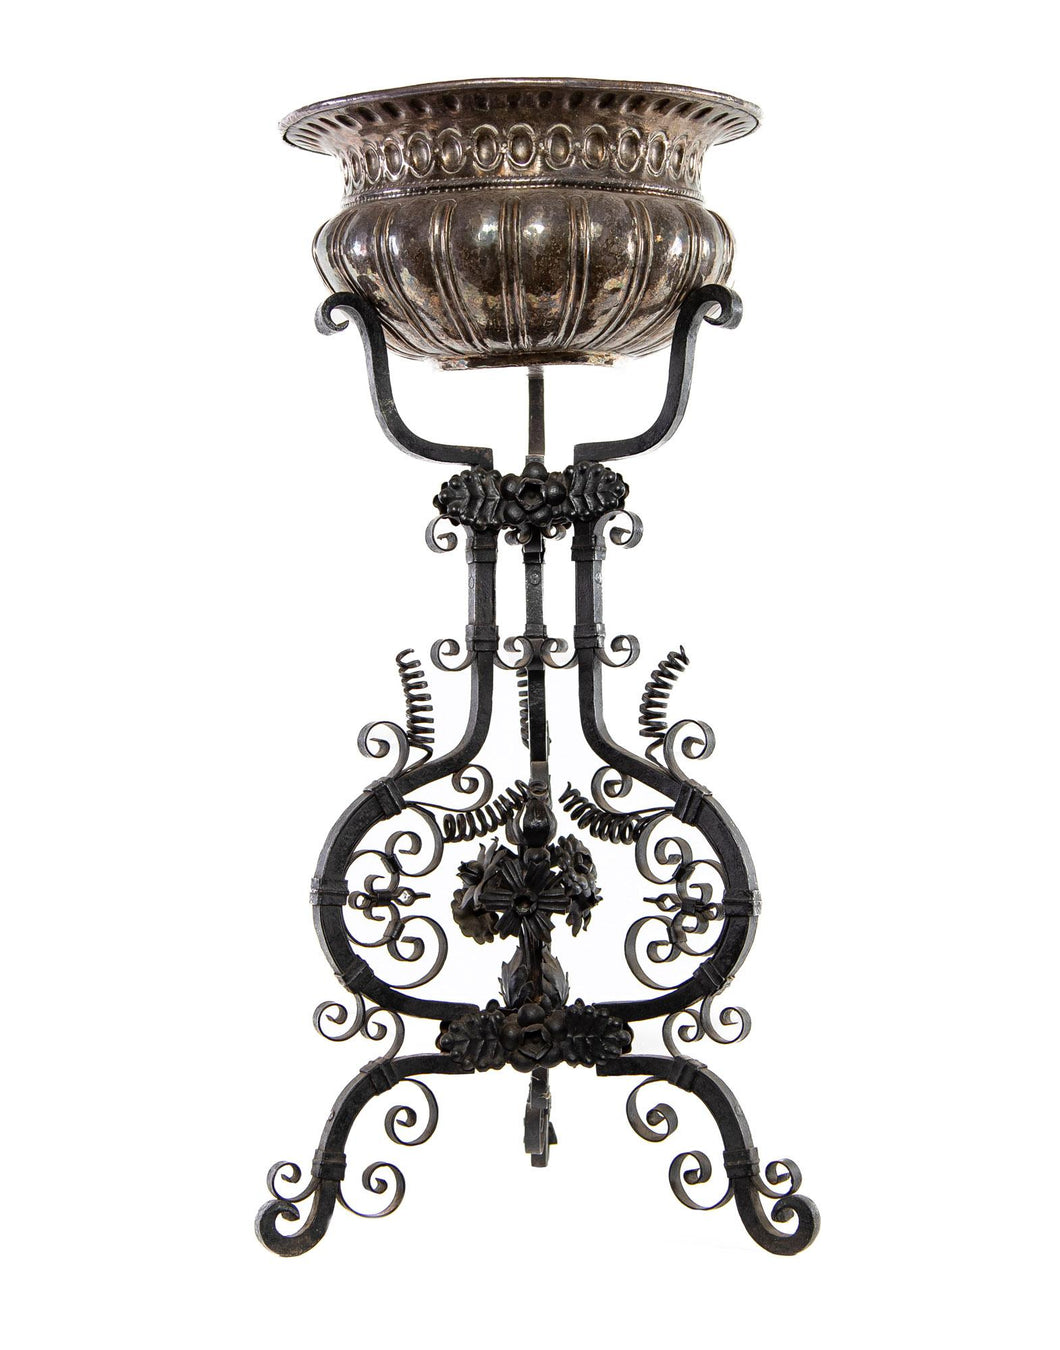 A Silvered Copper and Wrought Iron Lavabo, Spanish Circa 1780